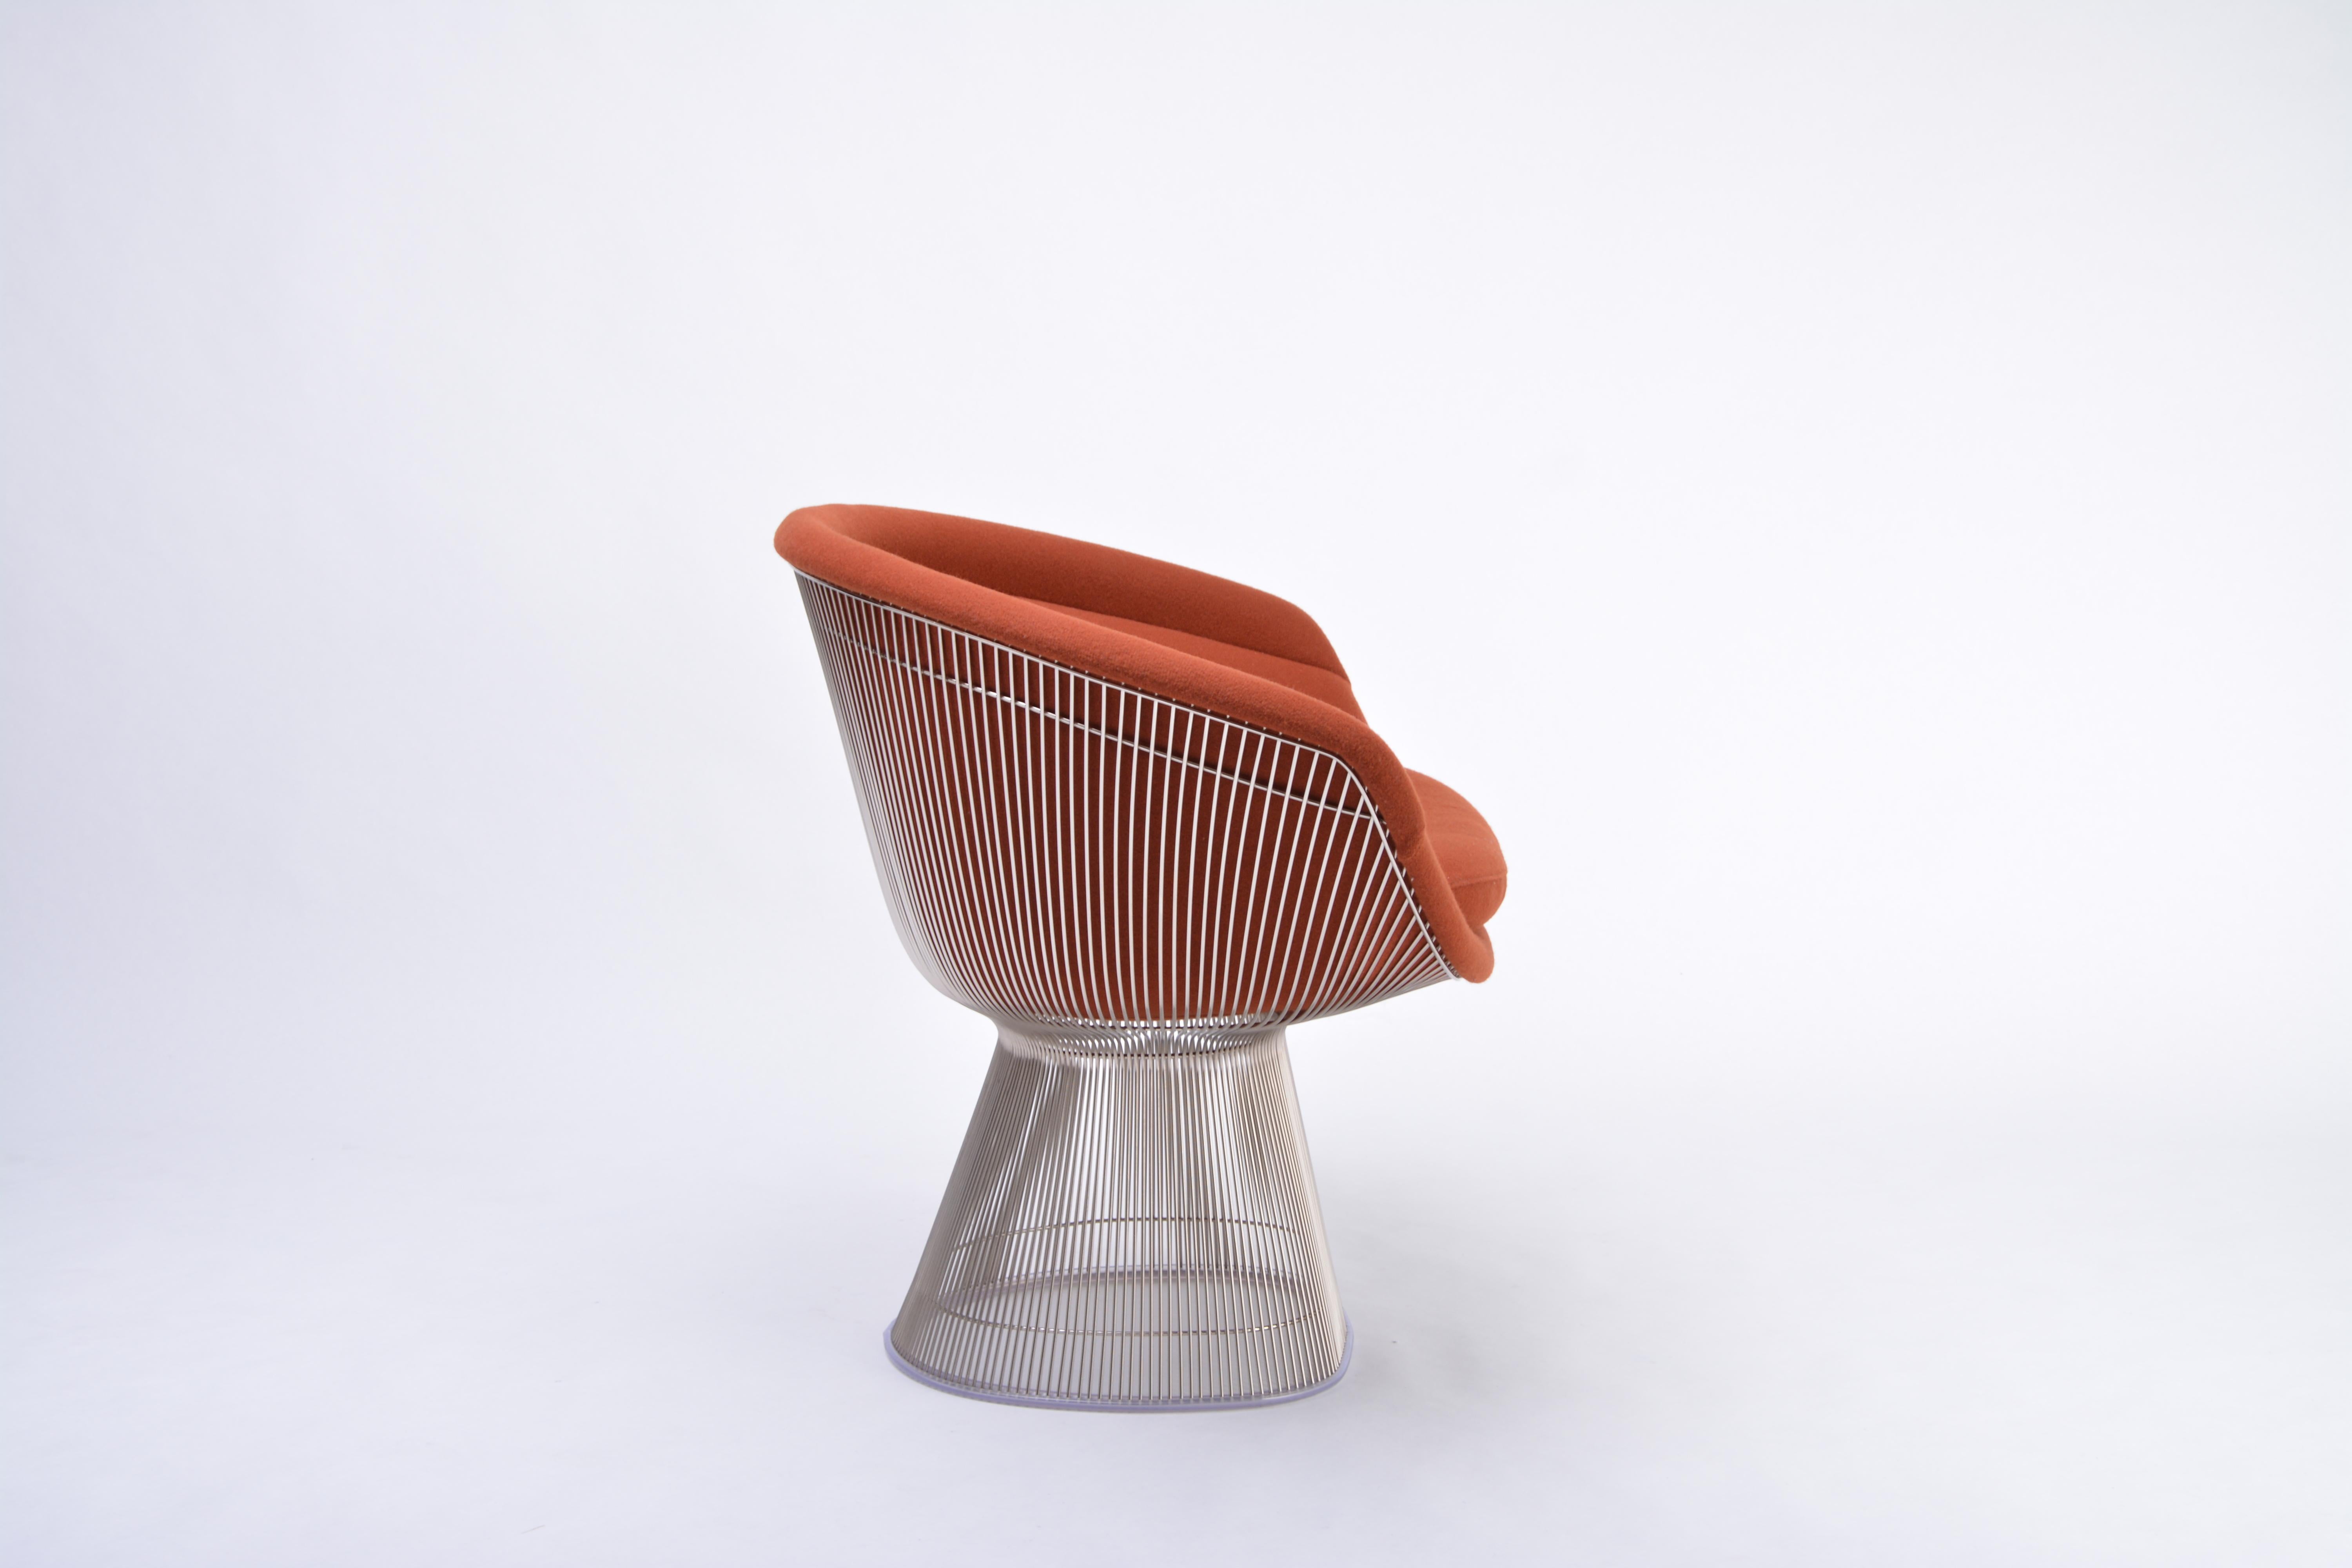 The lounge chair was designed by Warren Platner in 1966. The base is made of steel wire rods with nickel finish who are protected with clear lacquer. The base is covered with a clear plastic extrusion ring for smooth bottom surface. The seating